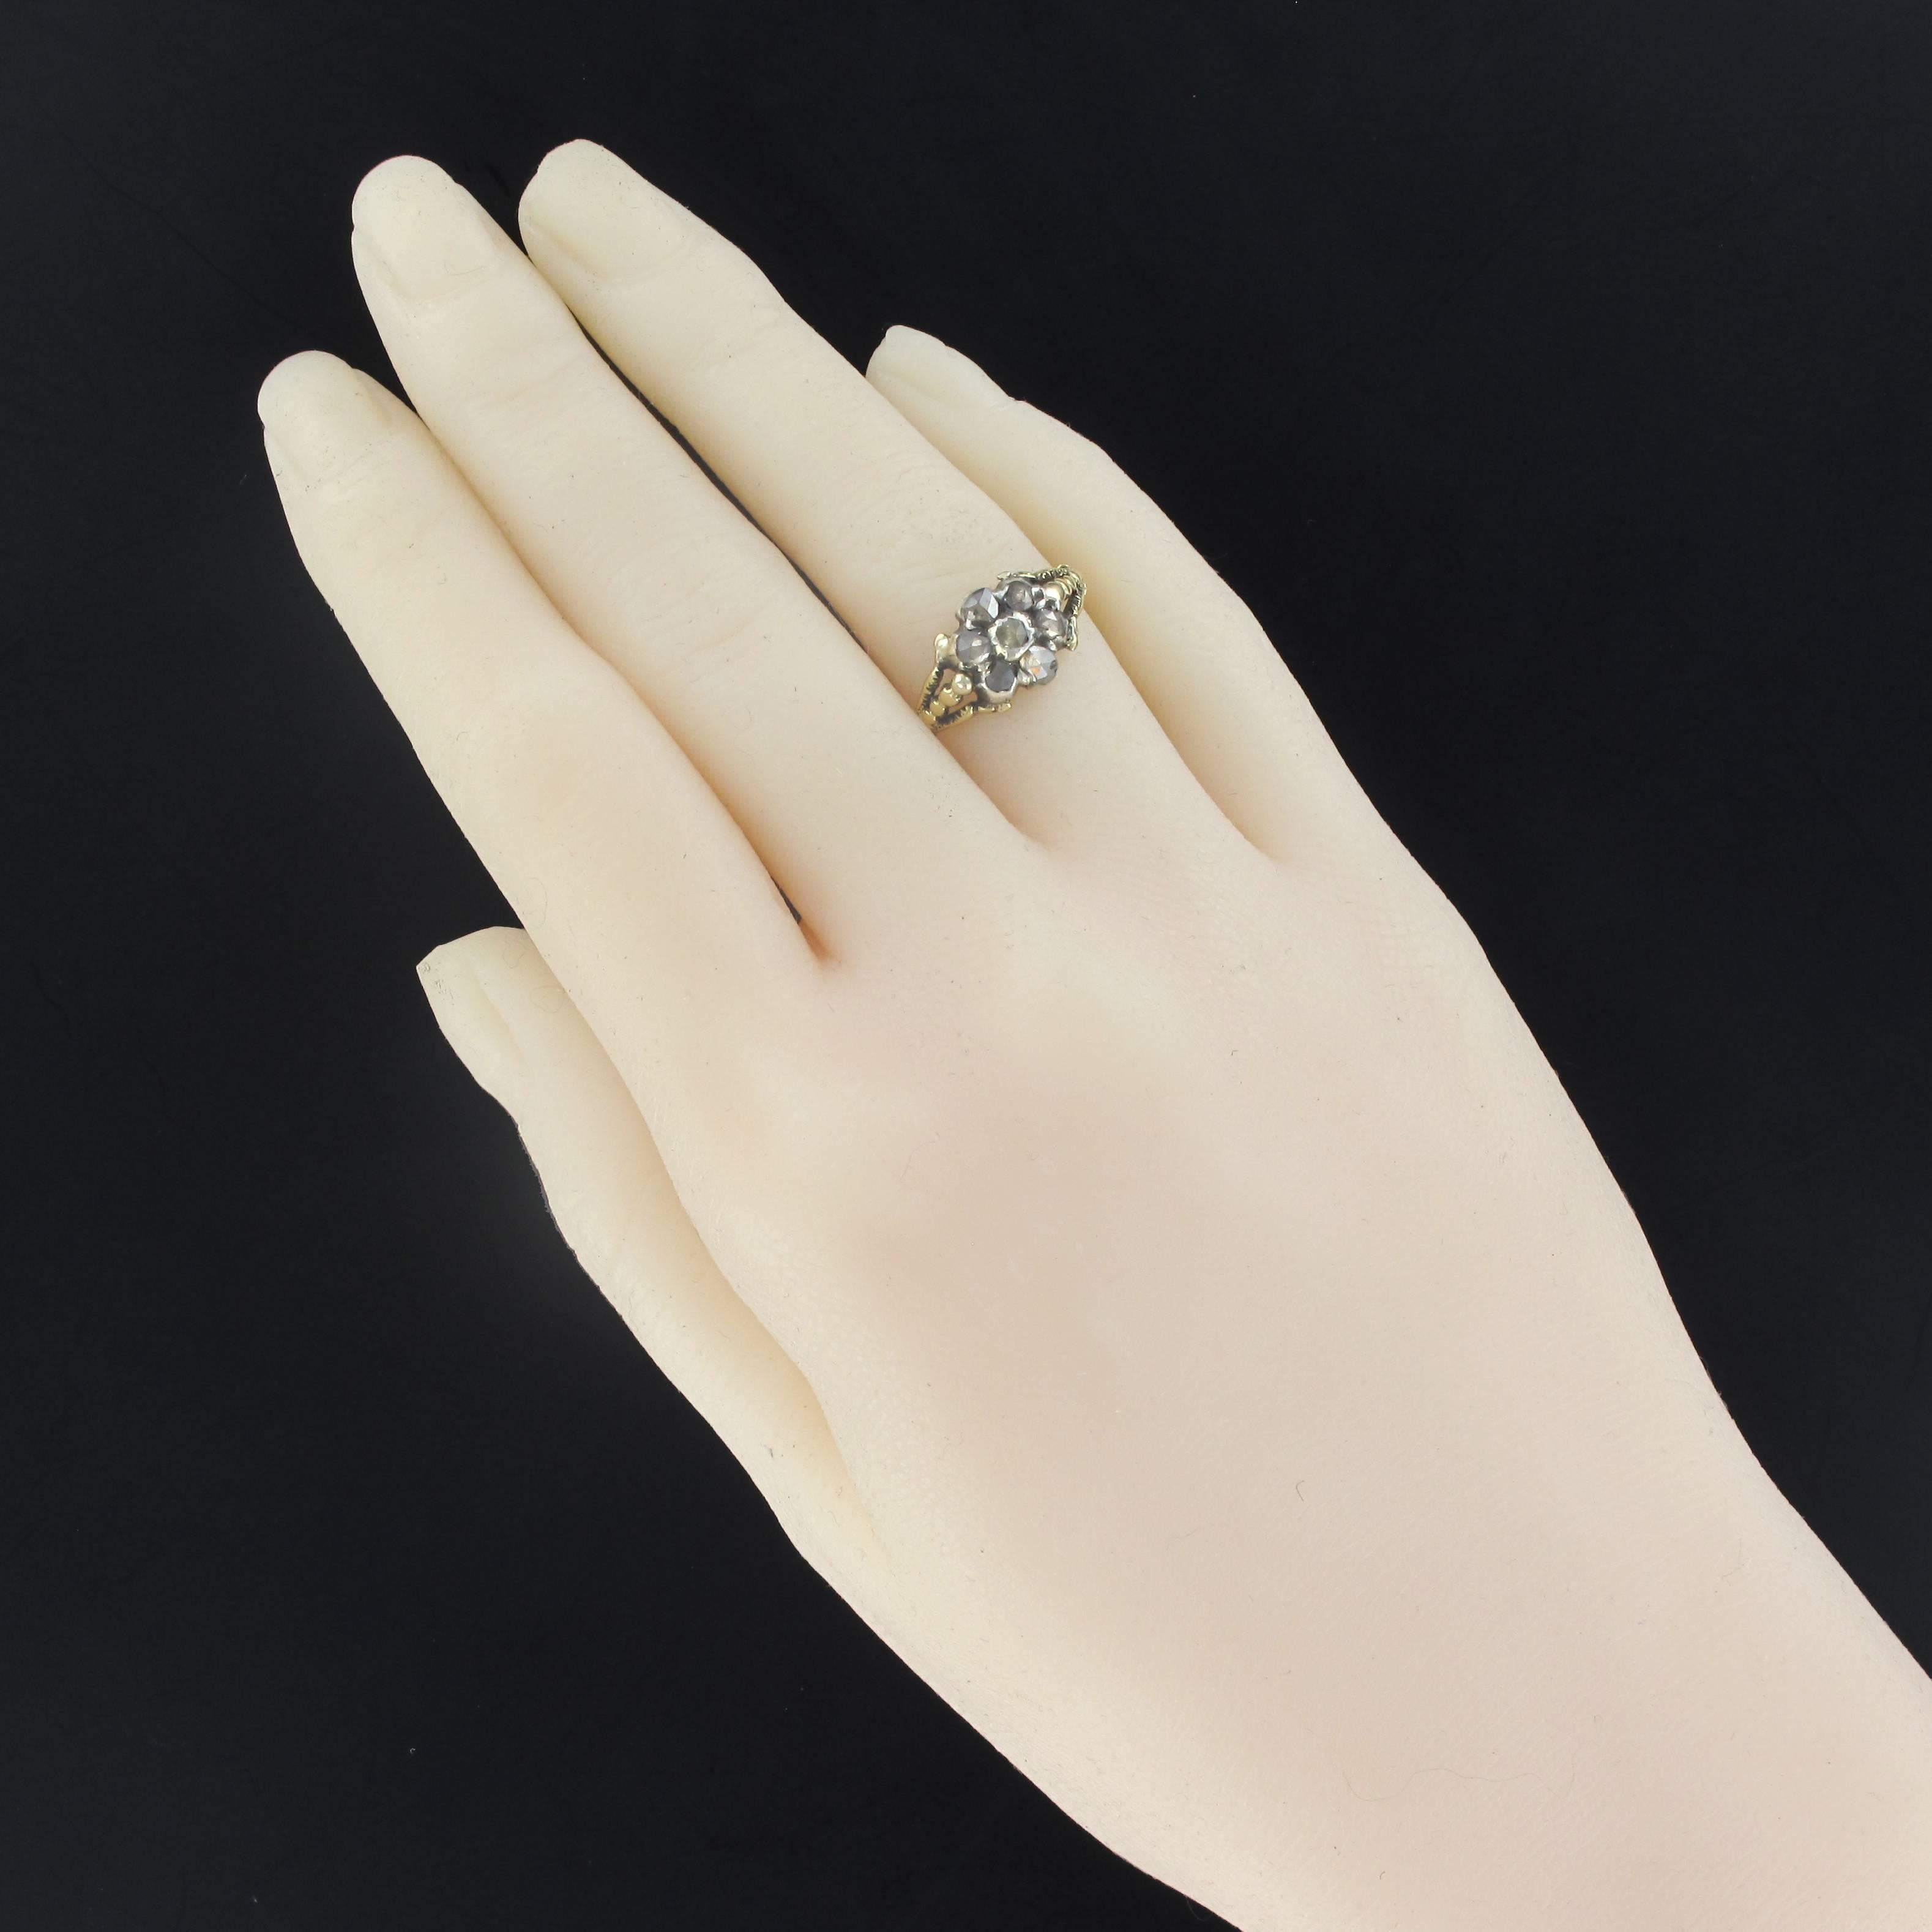 Ring in 18 carats yellow gold, owl head hallmark and silver swan hallmark.
Antique ring, it is set on silver by 6 rose cut diamonds. On both sides, the start of the ring is perforated and formed of a chiselled and beaded decoration.
Height: 9.5 mm,